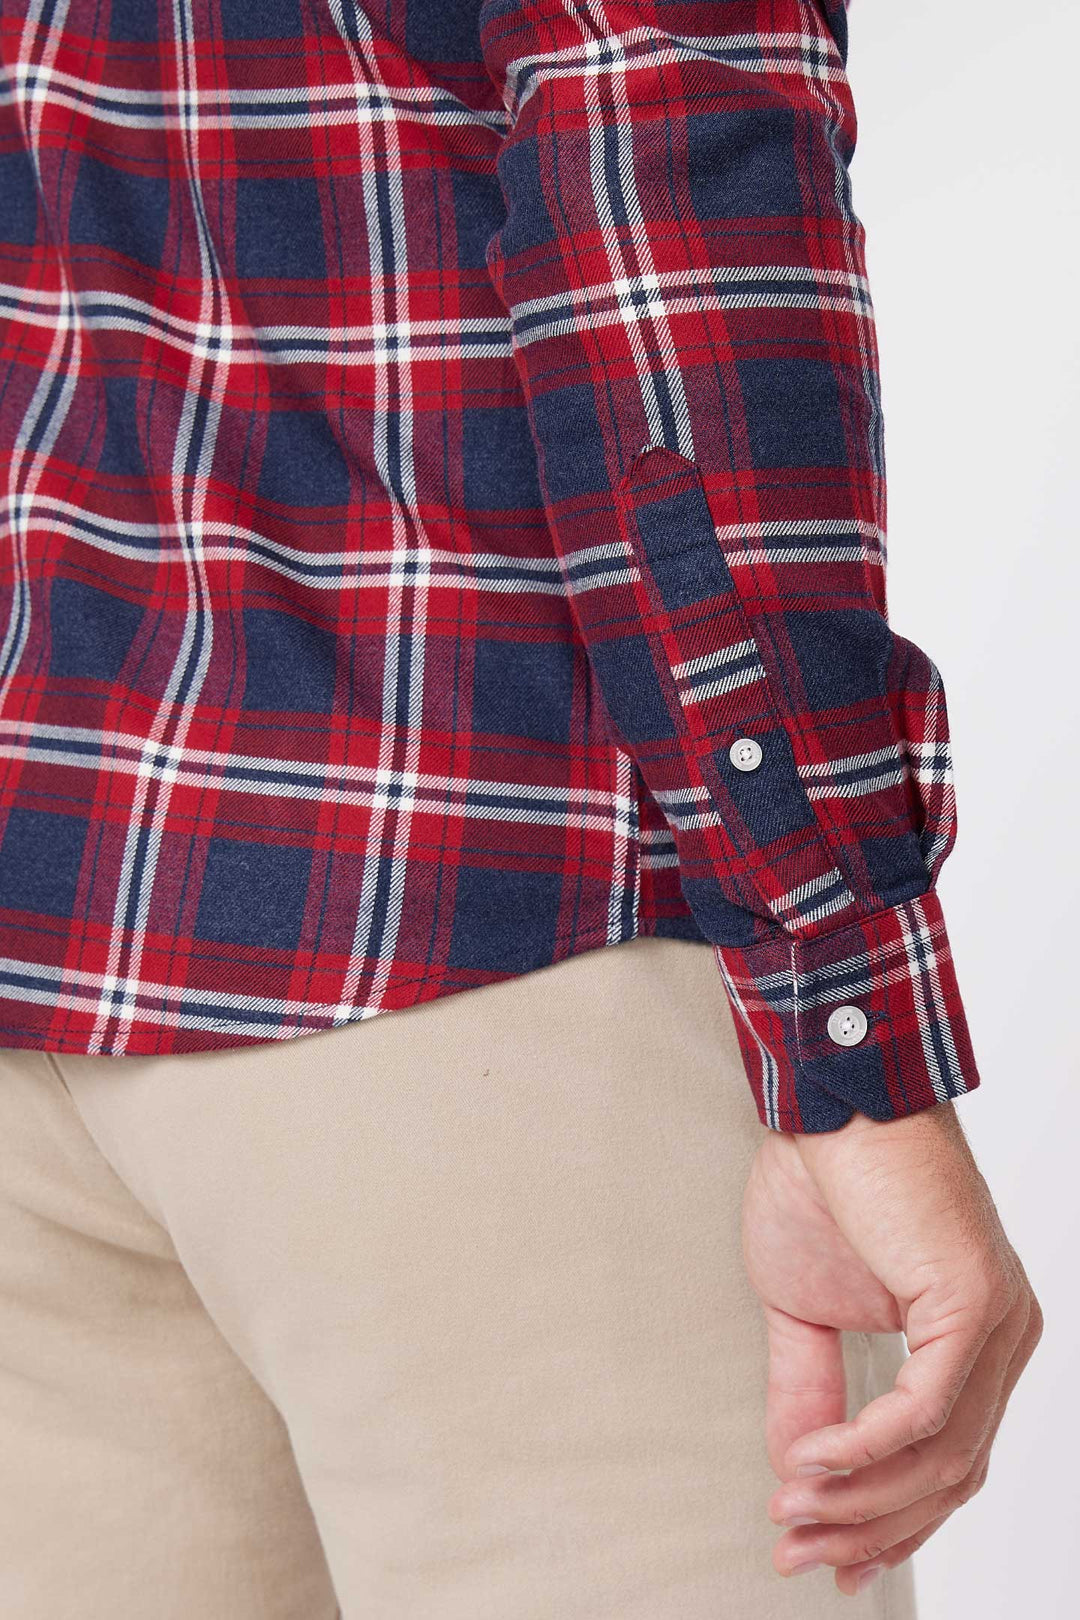 Buy Vintage Red Flannel Button-Down Shirt for Short Men | Ash & Erie   Flannel Everyday Shirt